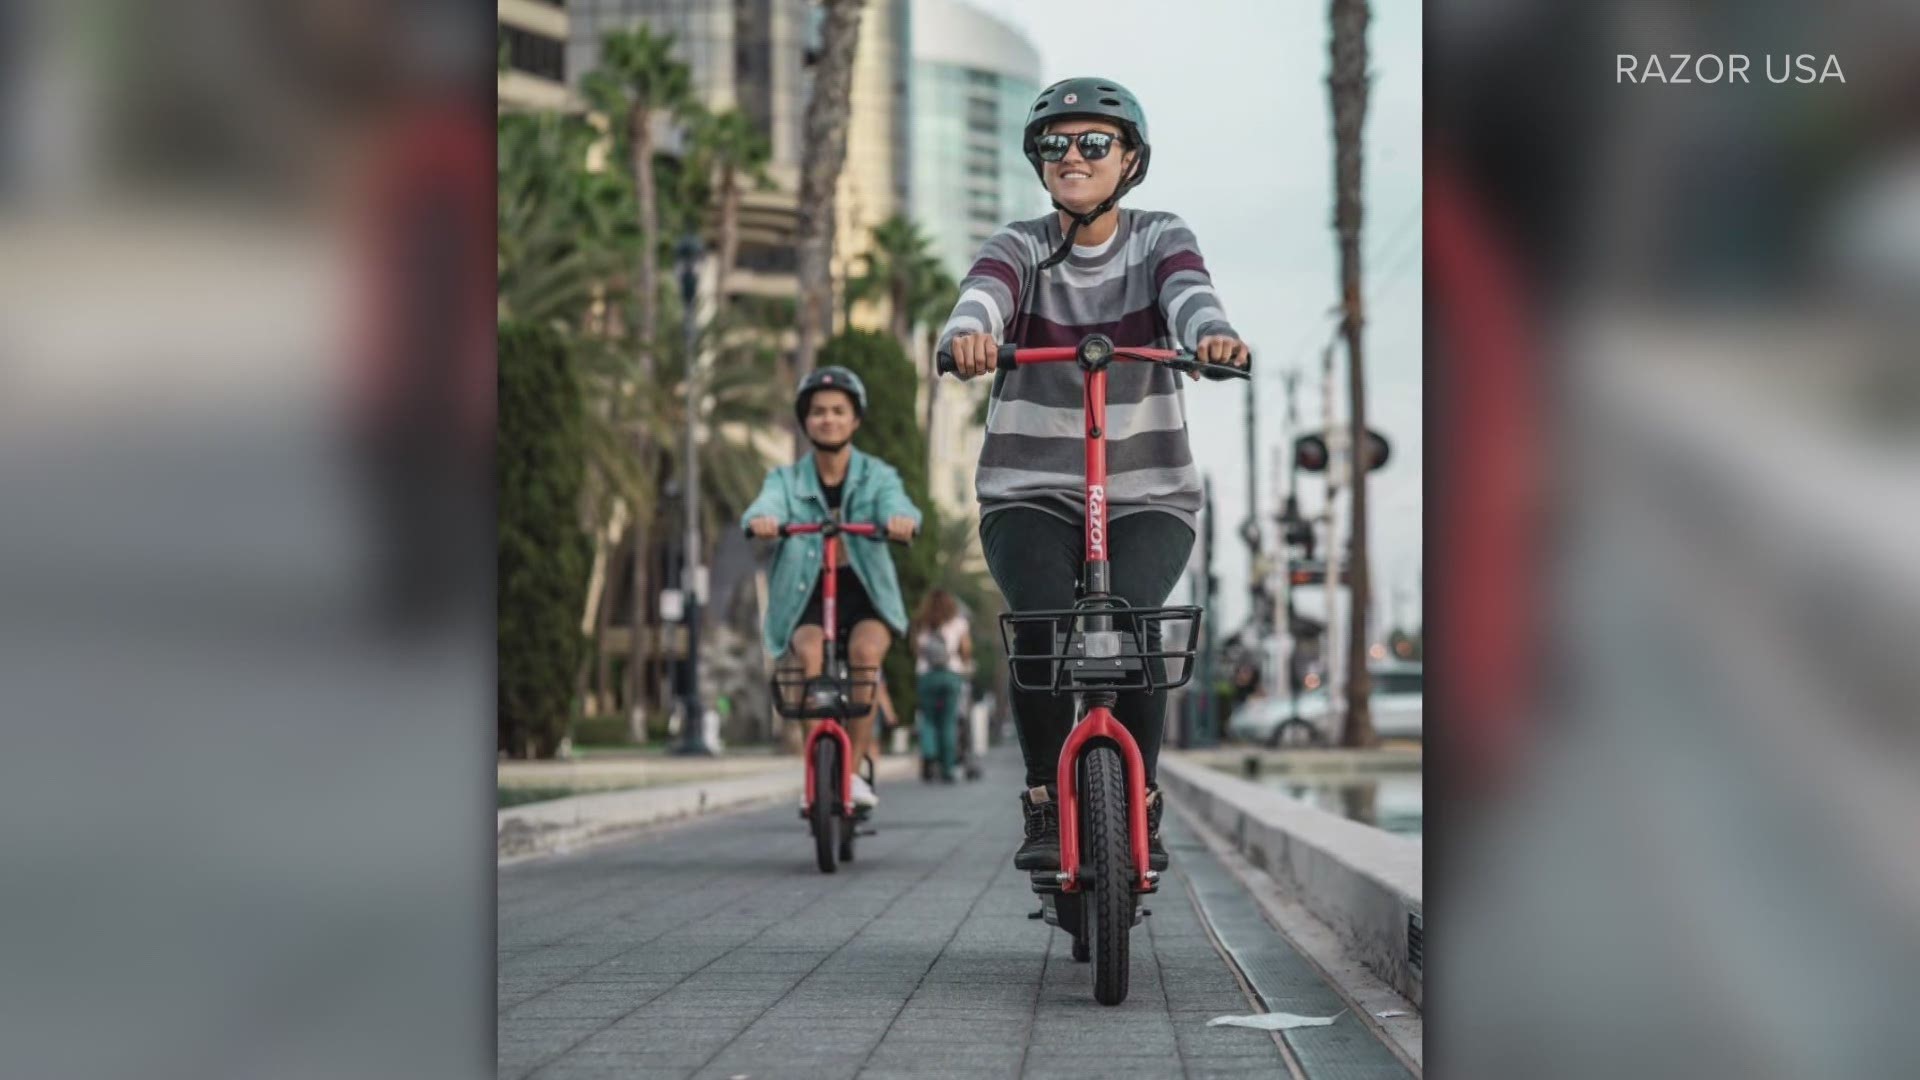 Razor USA will be offering 400 electric scooters for use in Tacoma.  The scooters have a 15 mph limit and can only be used in specific parts of town.